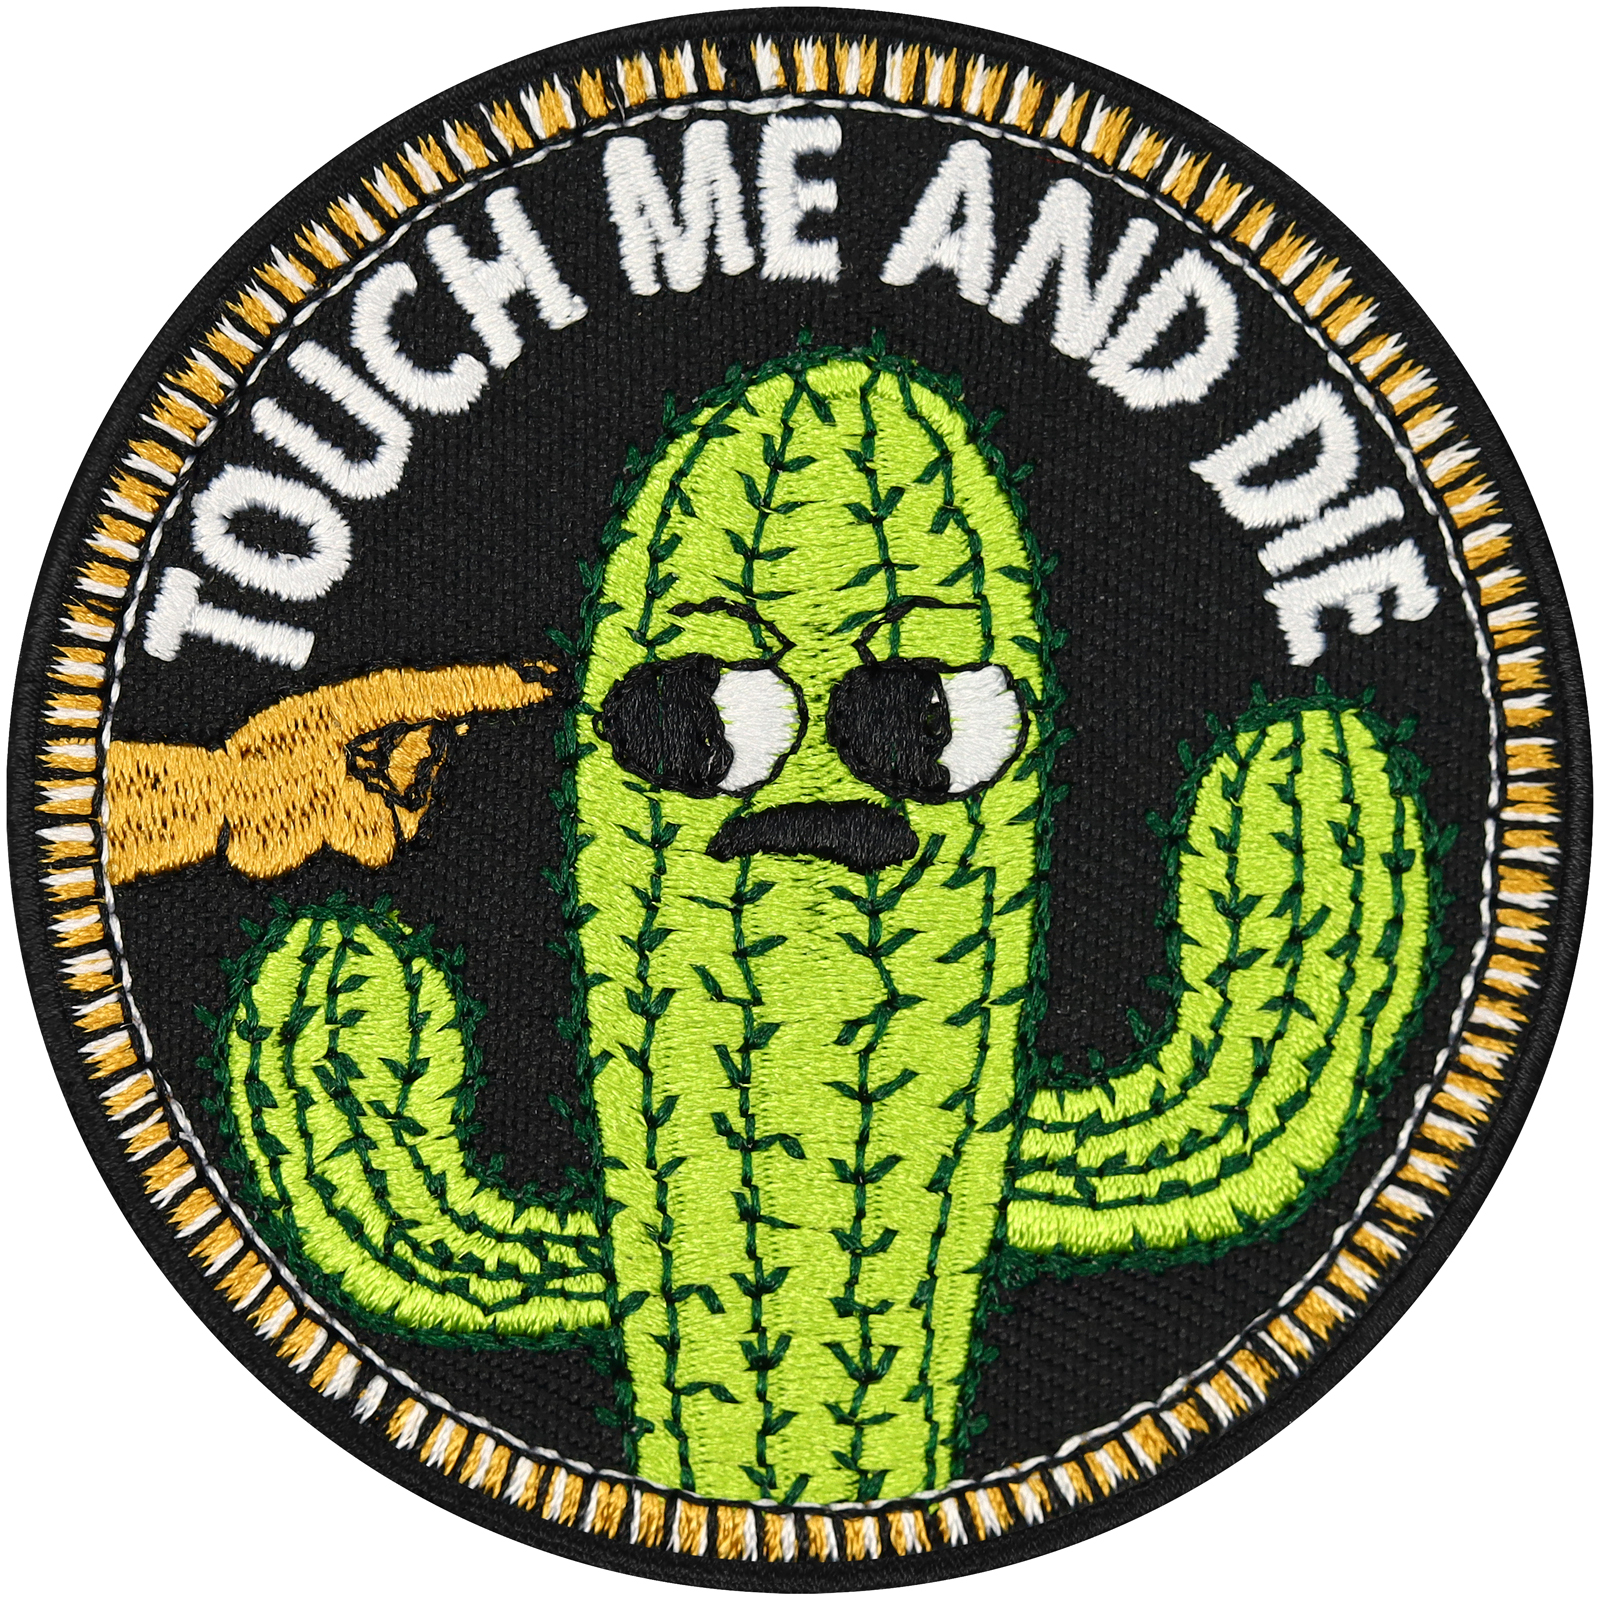 Touch me and die - Patch